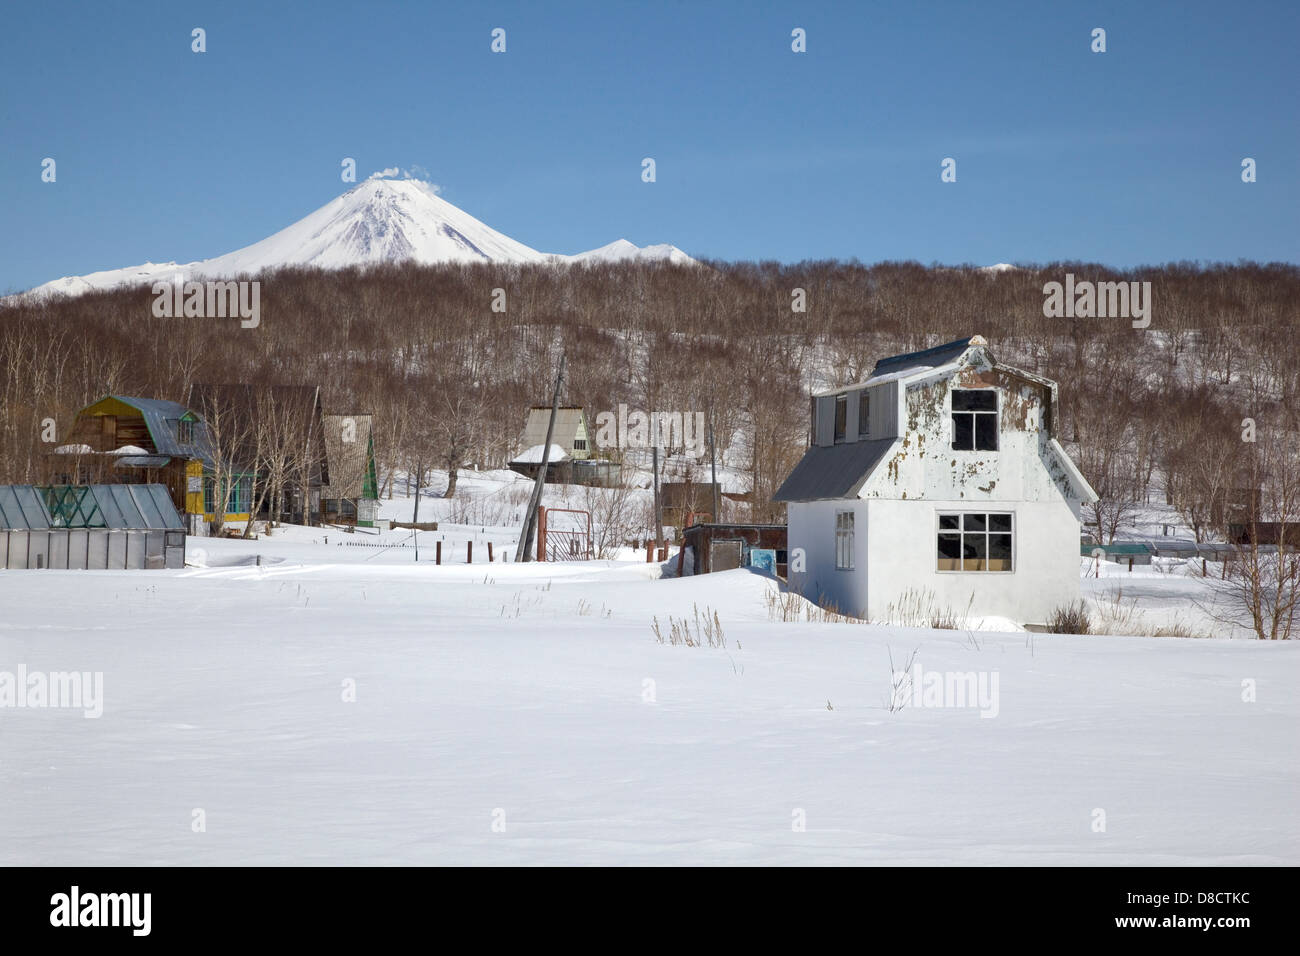 Traditional country homes in Petropavlovsk - Kamchatsky, Siberia, Russia. Stock Photo